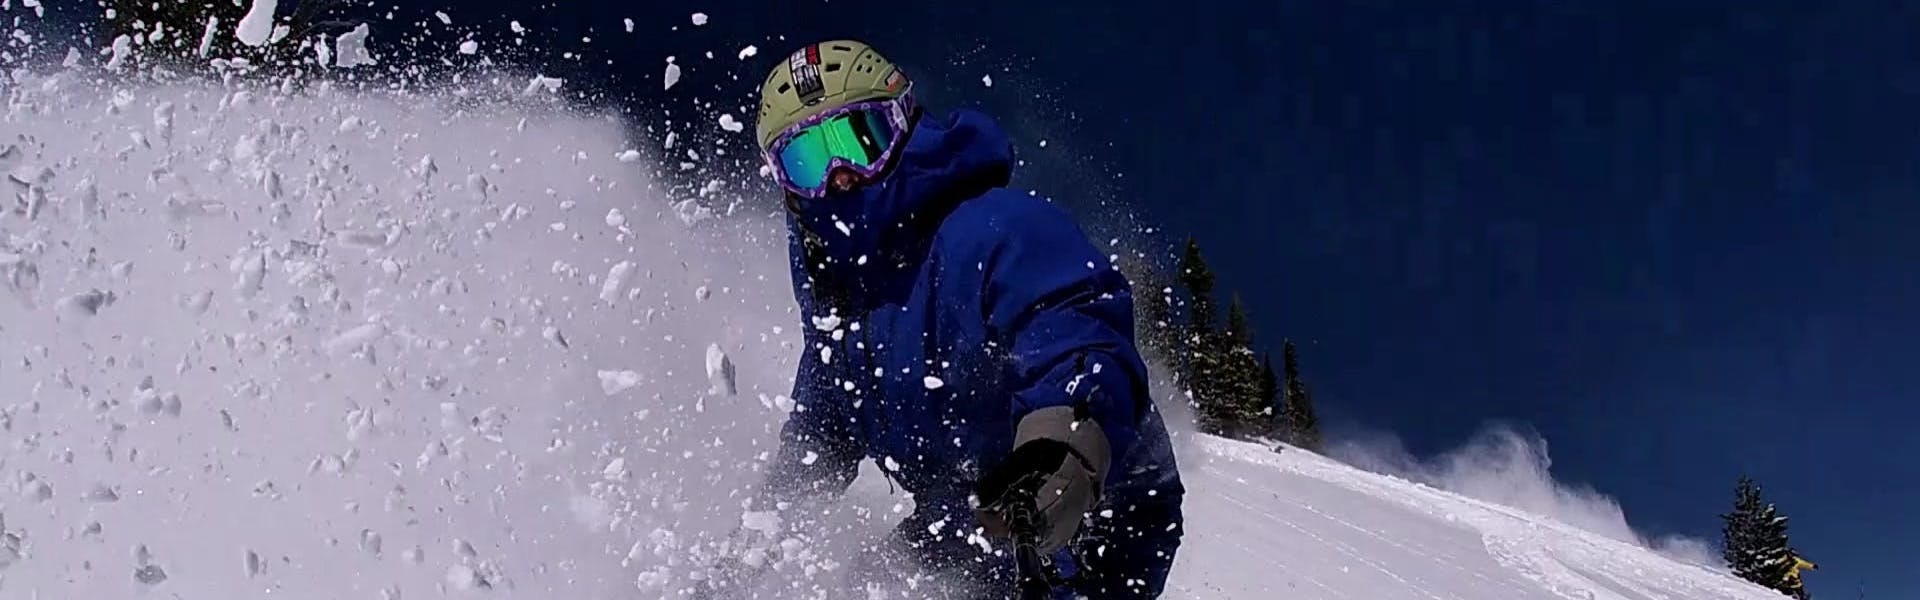 A snowboarder turning down a mountain as snow sprays him. 